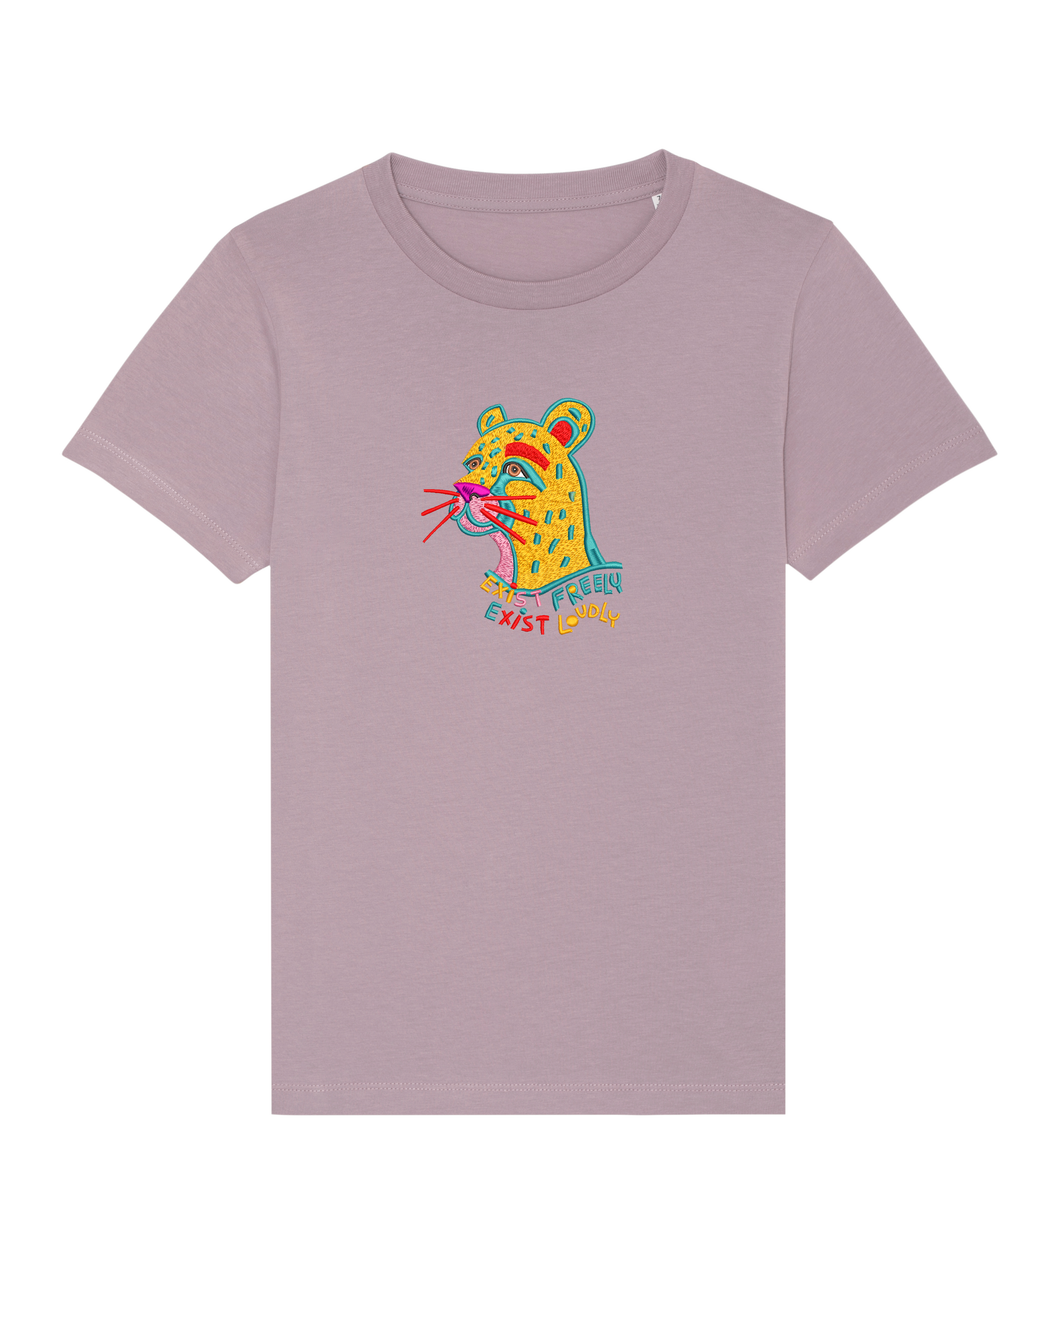 Cheetah - Embroidered kids tshirt-OUTLET🔴